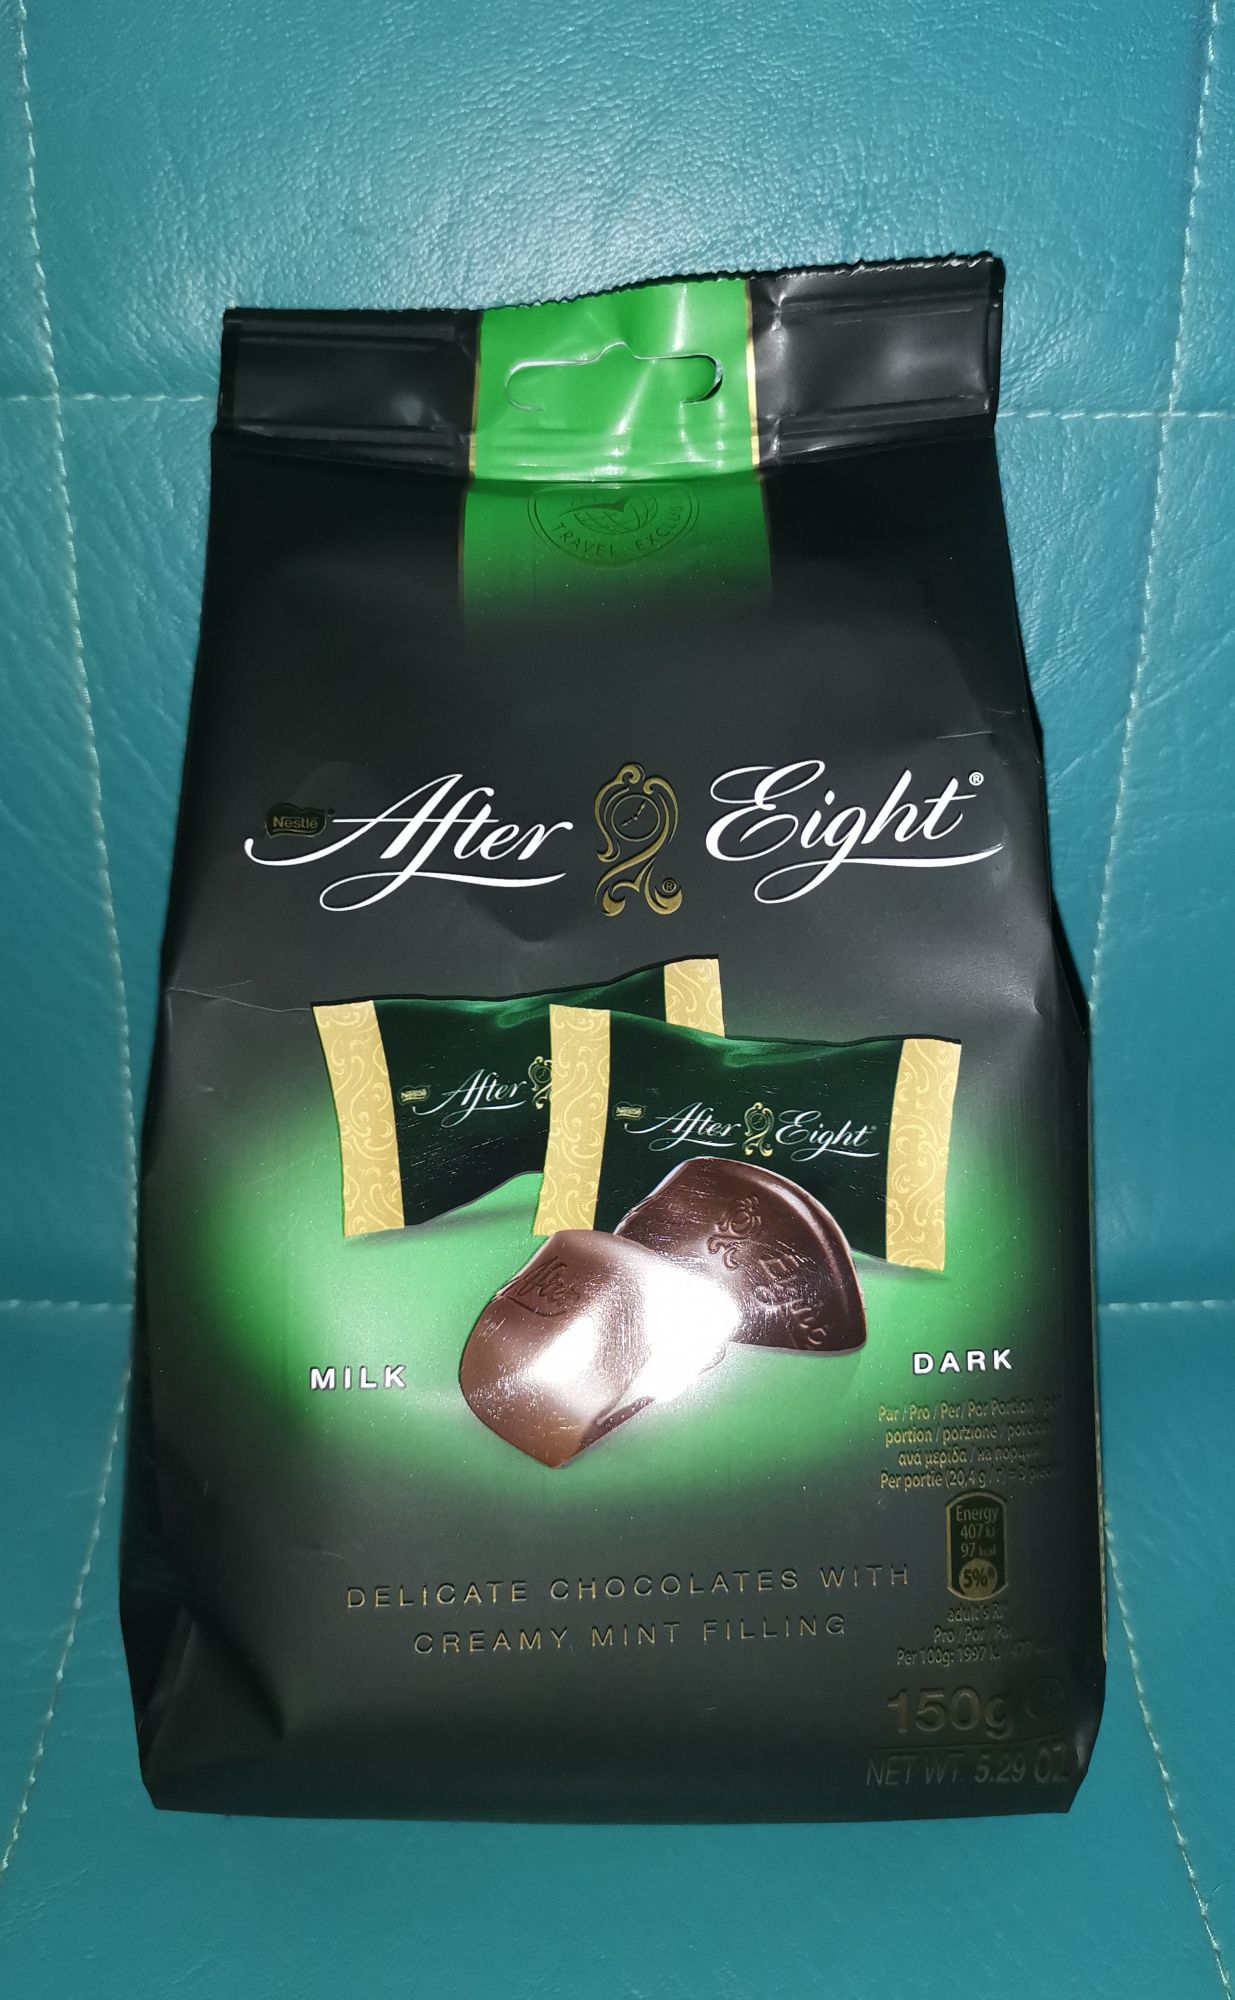 Shop After Eight online